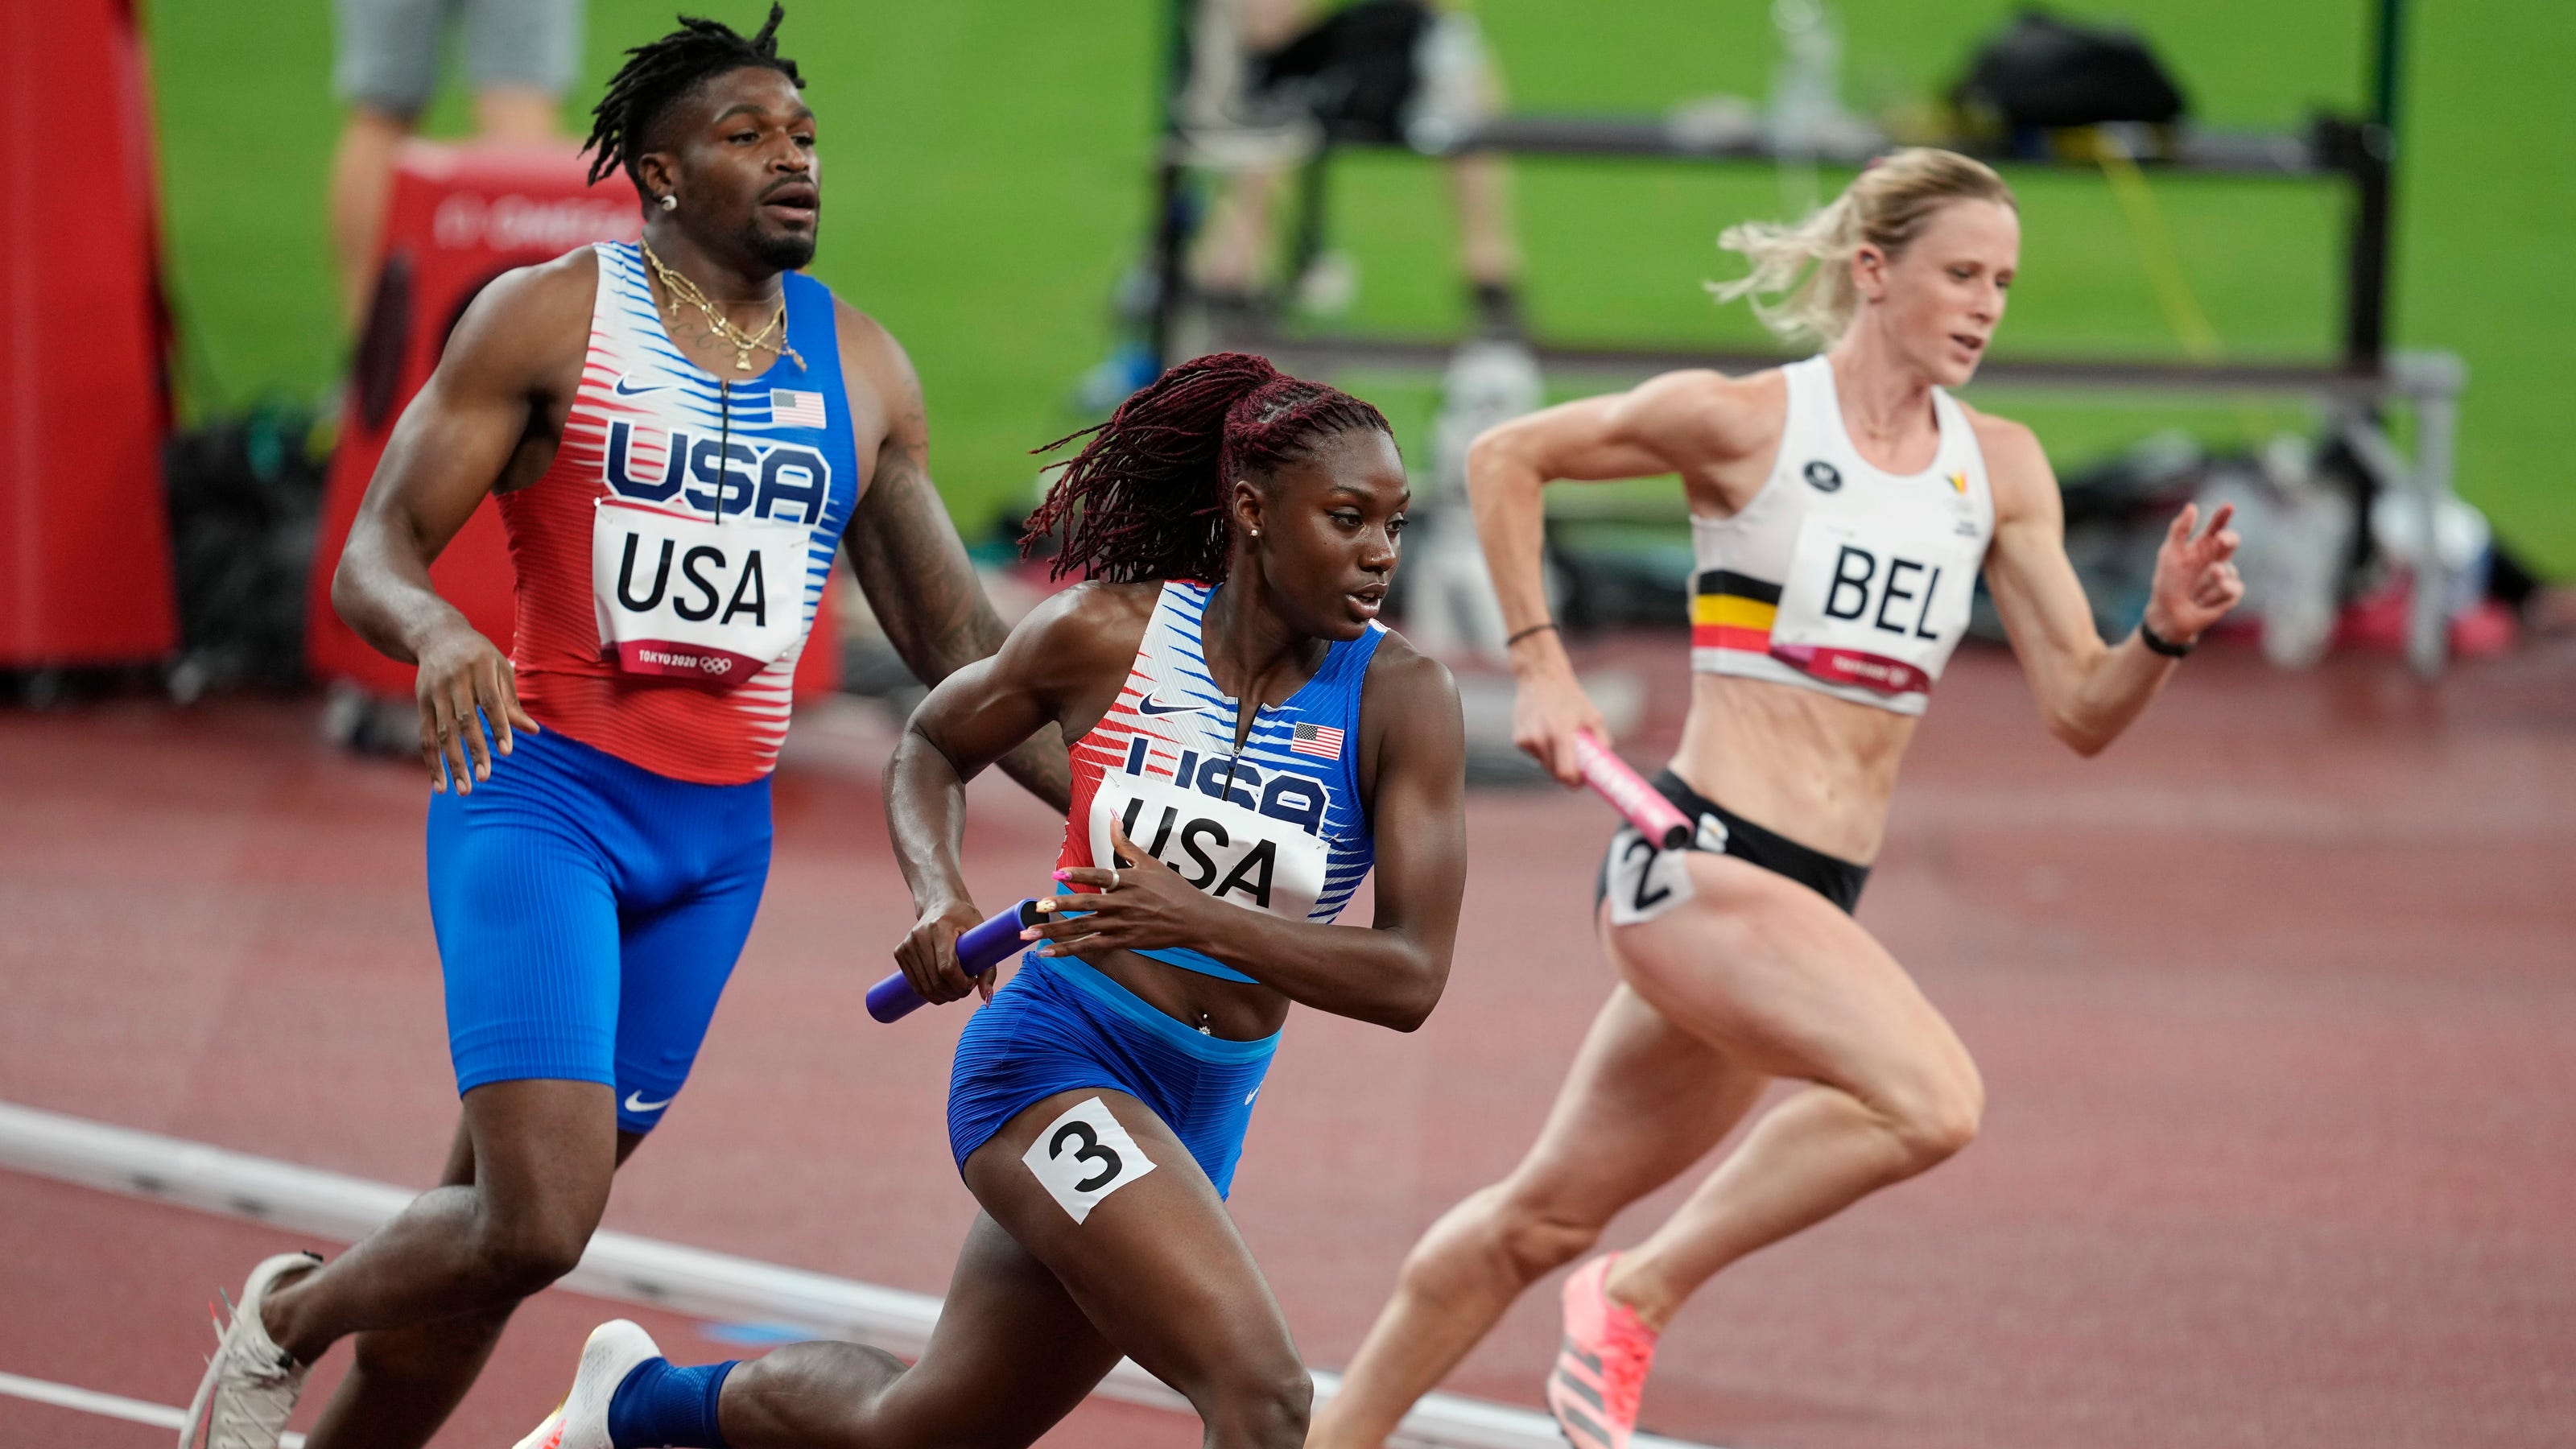 USA's mixed gender relay is reinstated after disqualification